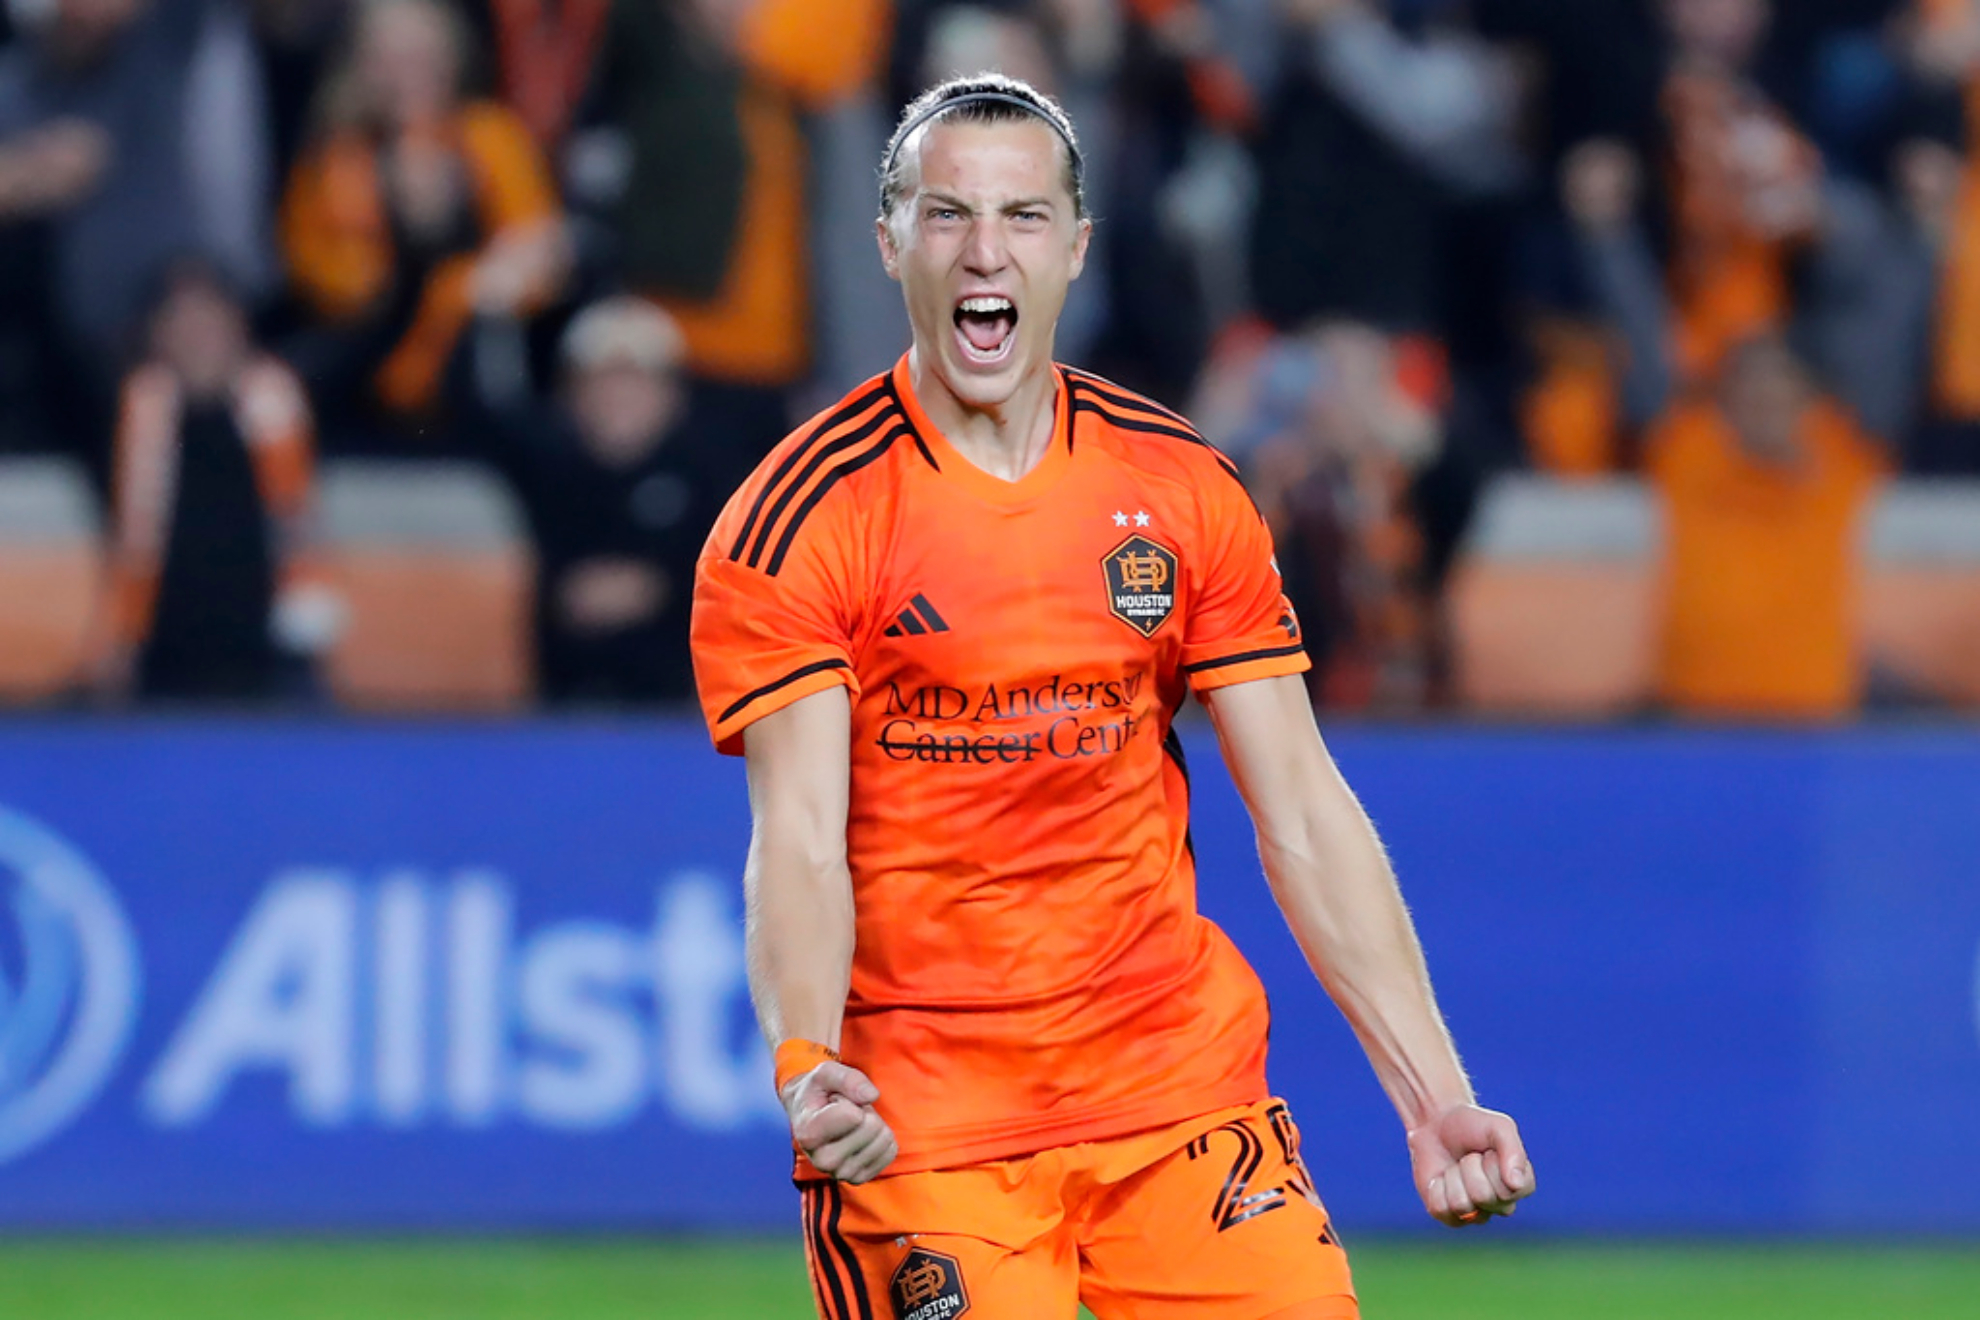 Houston Dynamo advances to Western semifinals in dramatic penalty shootout over Real Salt Lake